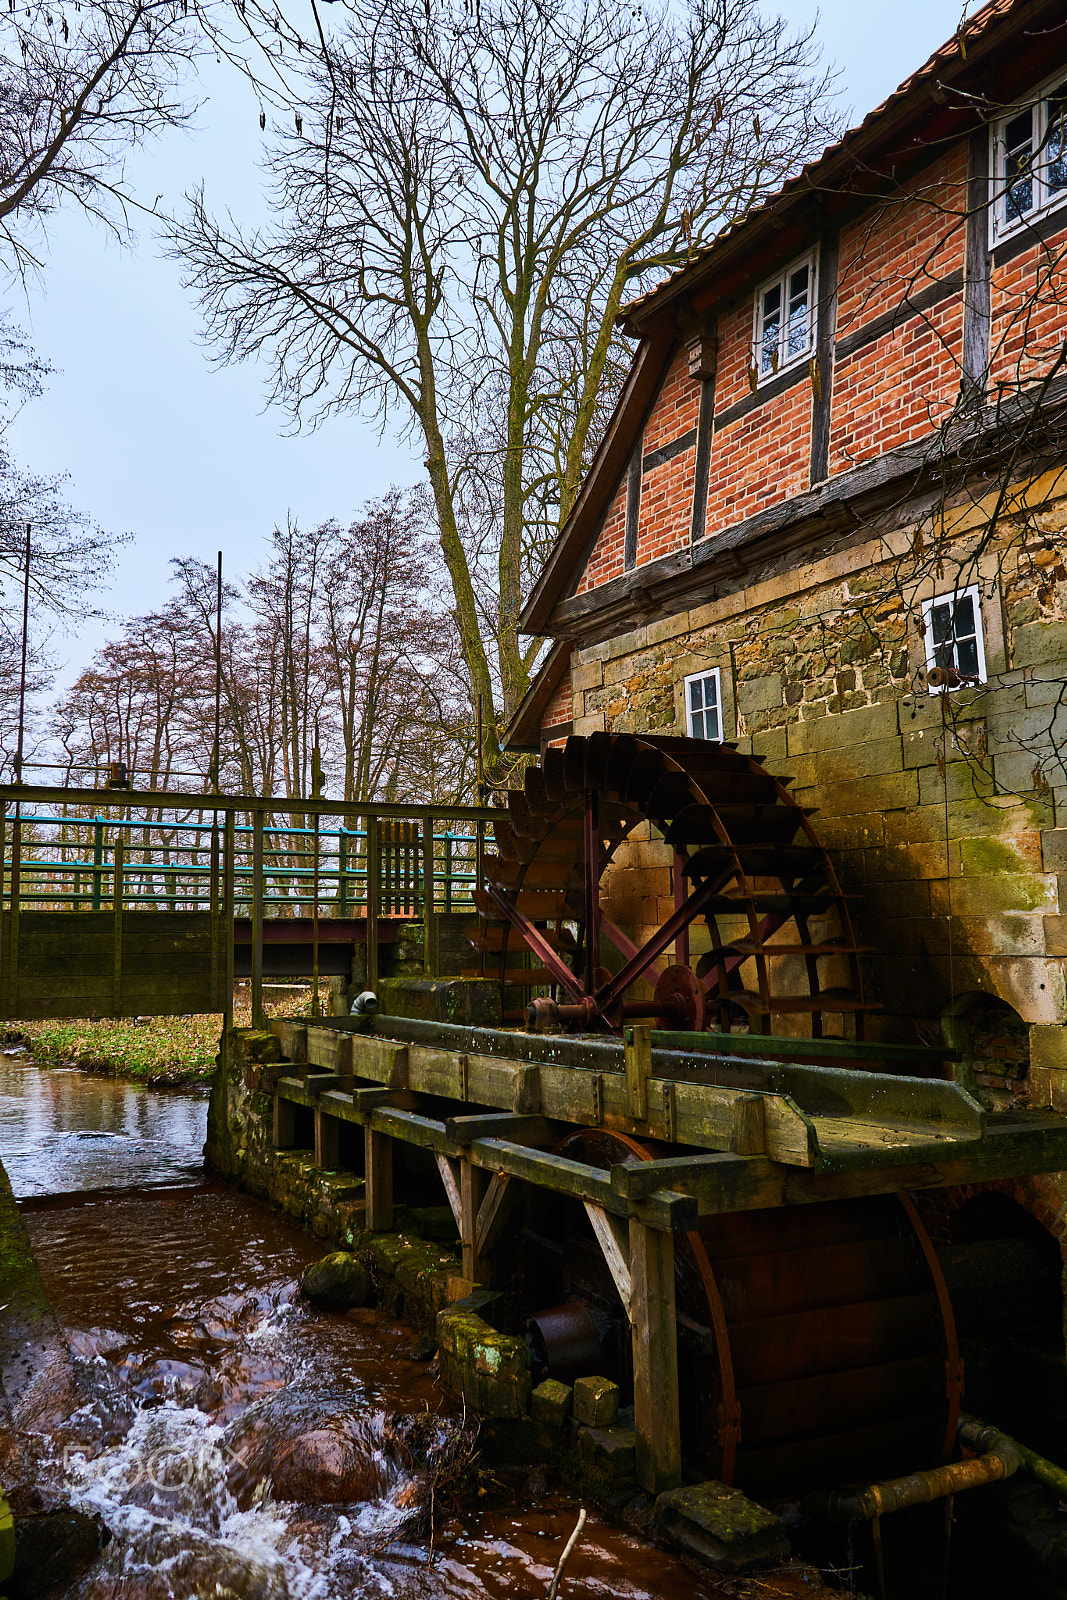 Sony a6000 sample photo. Watermill photography